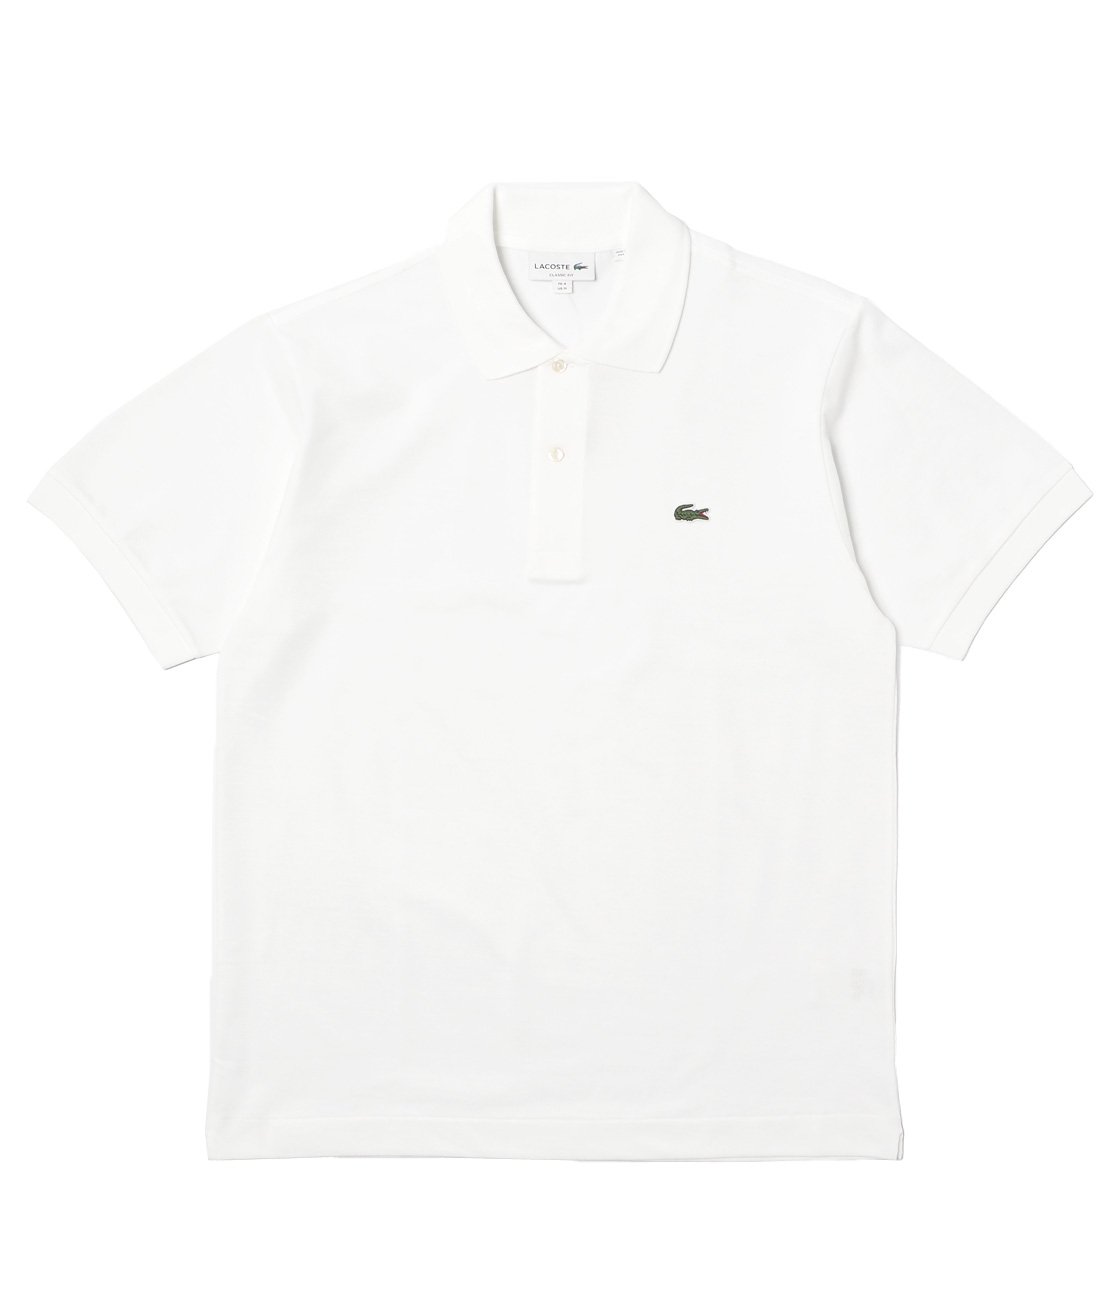 LACOSTE】L1212 S/S CLASSIC PIQUET POLO - WHITE ポロシャツ ラコステ